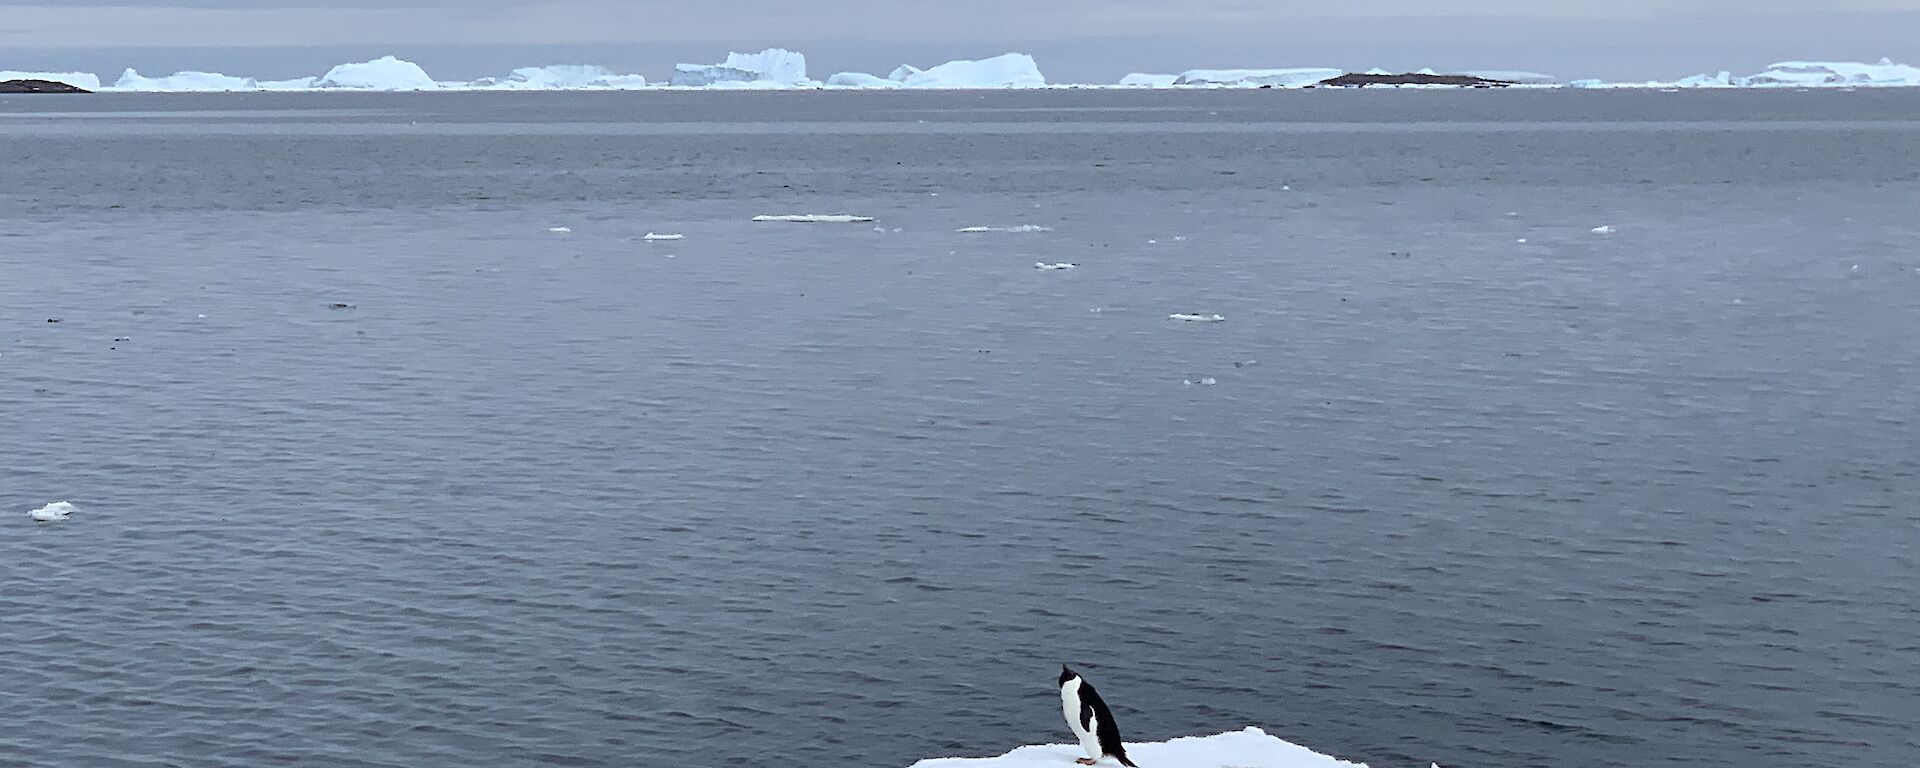 Penguin standing on a small berg